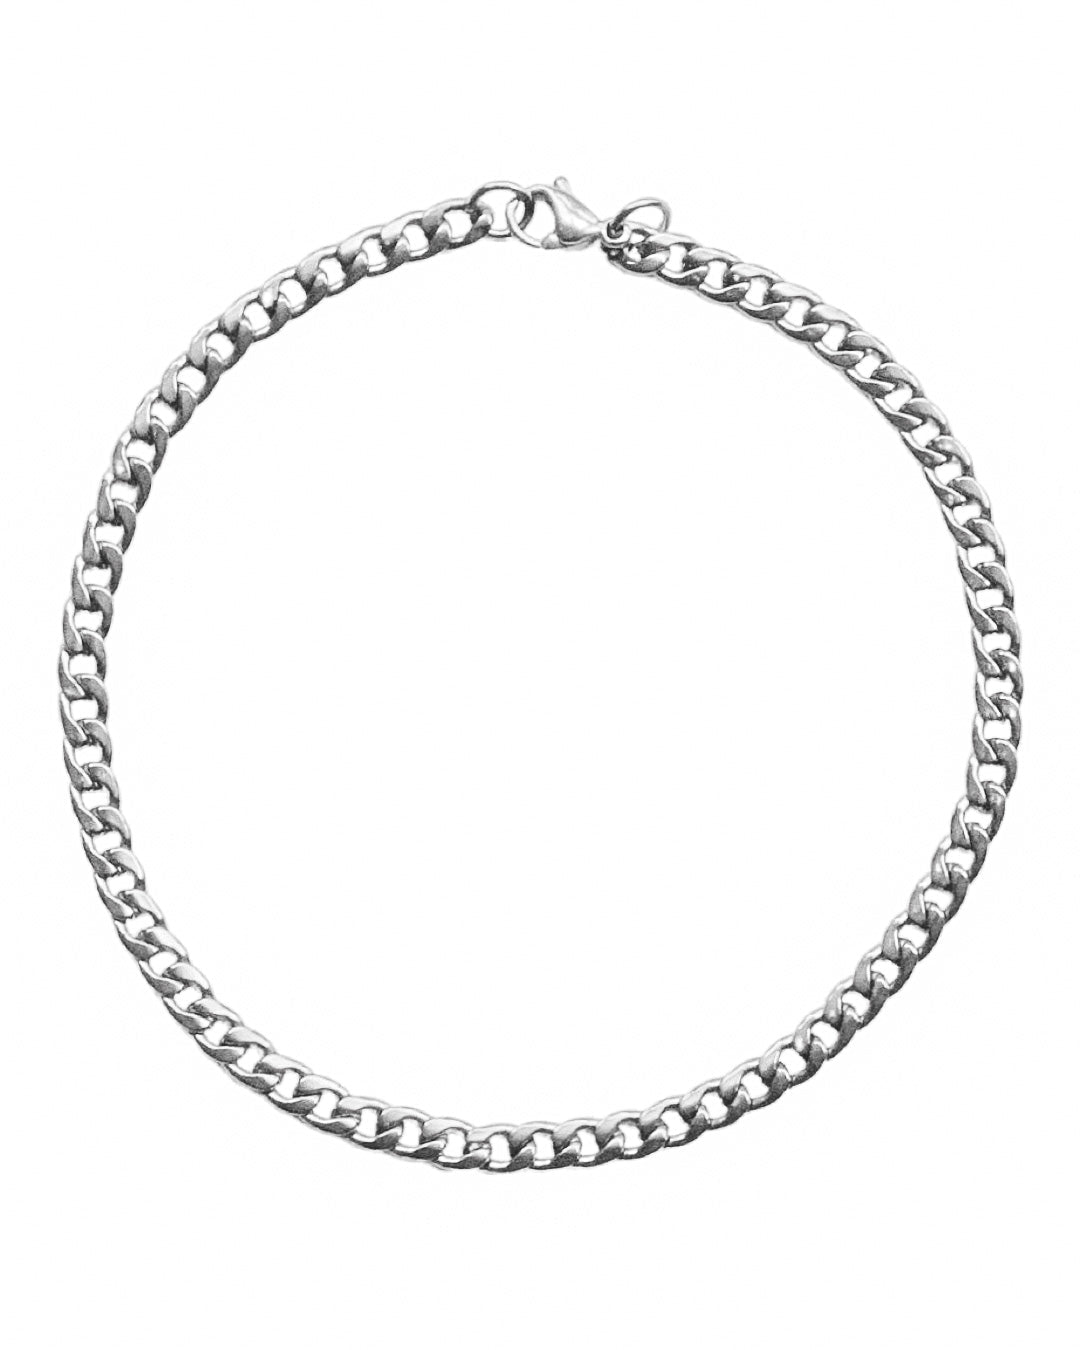 CLASSIC CURB ANKLET - SILVER - DE.FINE Collection Jewelry